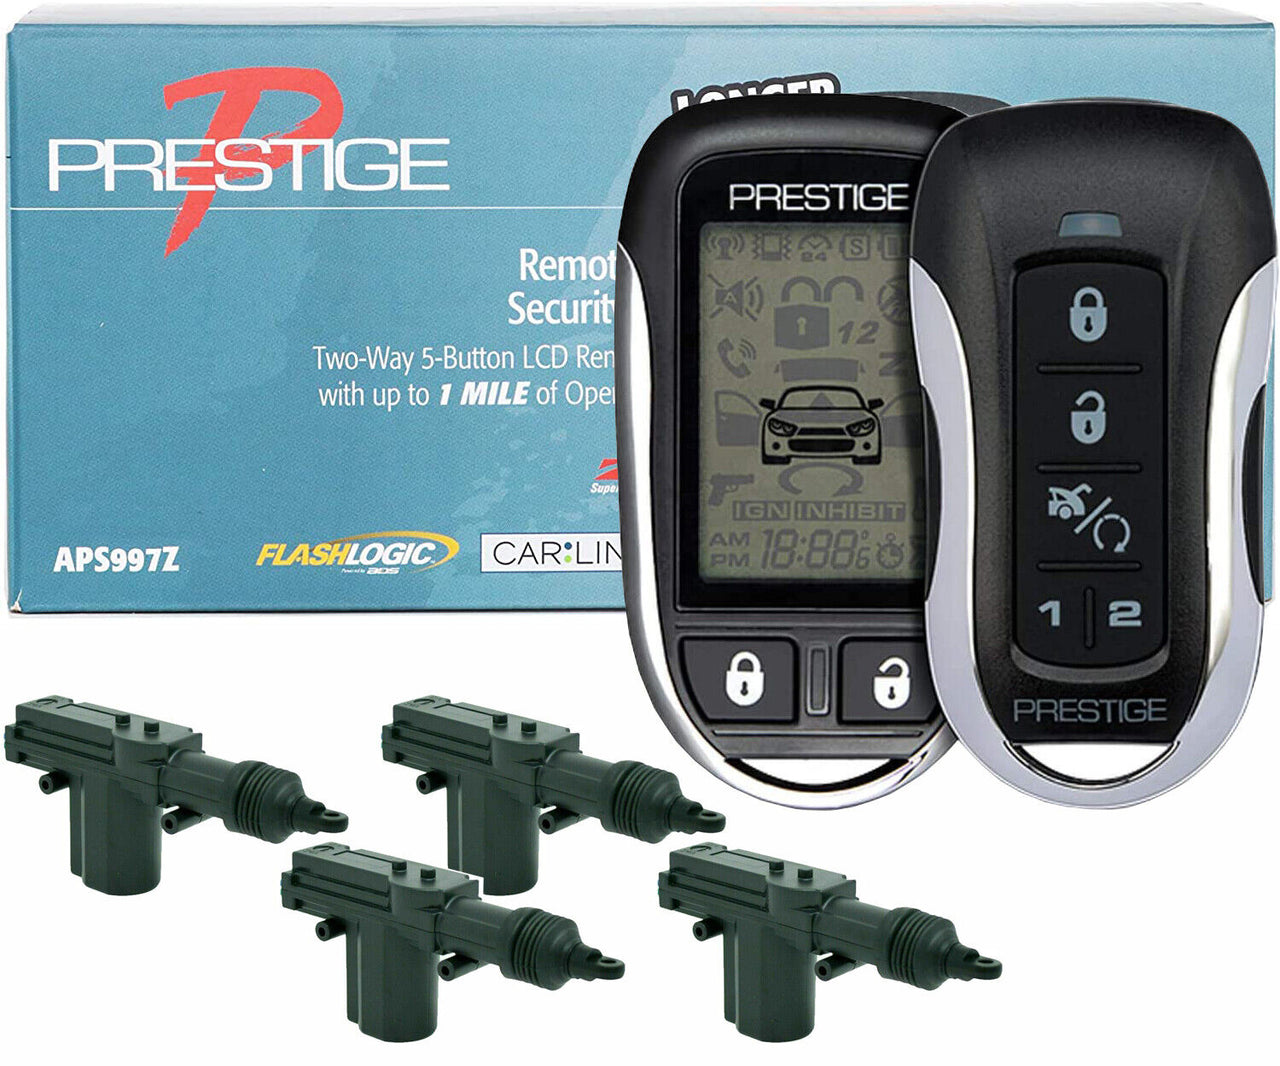 Prestige APS997ZLR Two Way LCD Remote Start / Keyless Entry & Security System with Over 1 Mile Operating Range + 4 Absolute Universal Door Lock